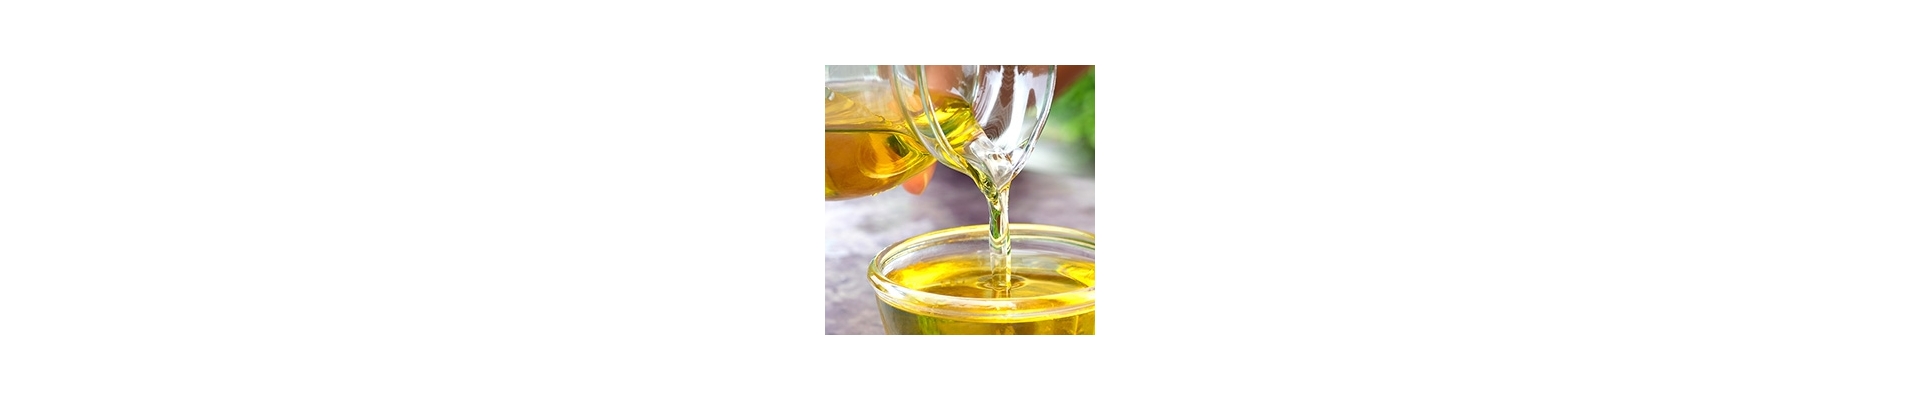 Organic Carrier Oils | The Soap Kitchen™